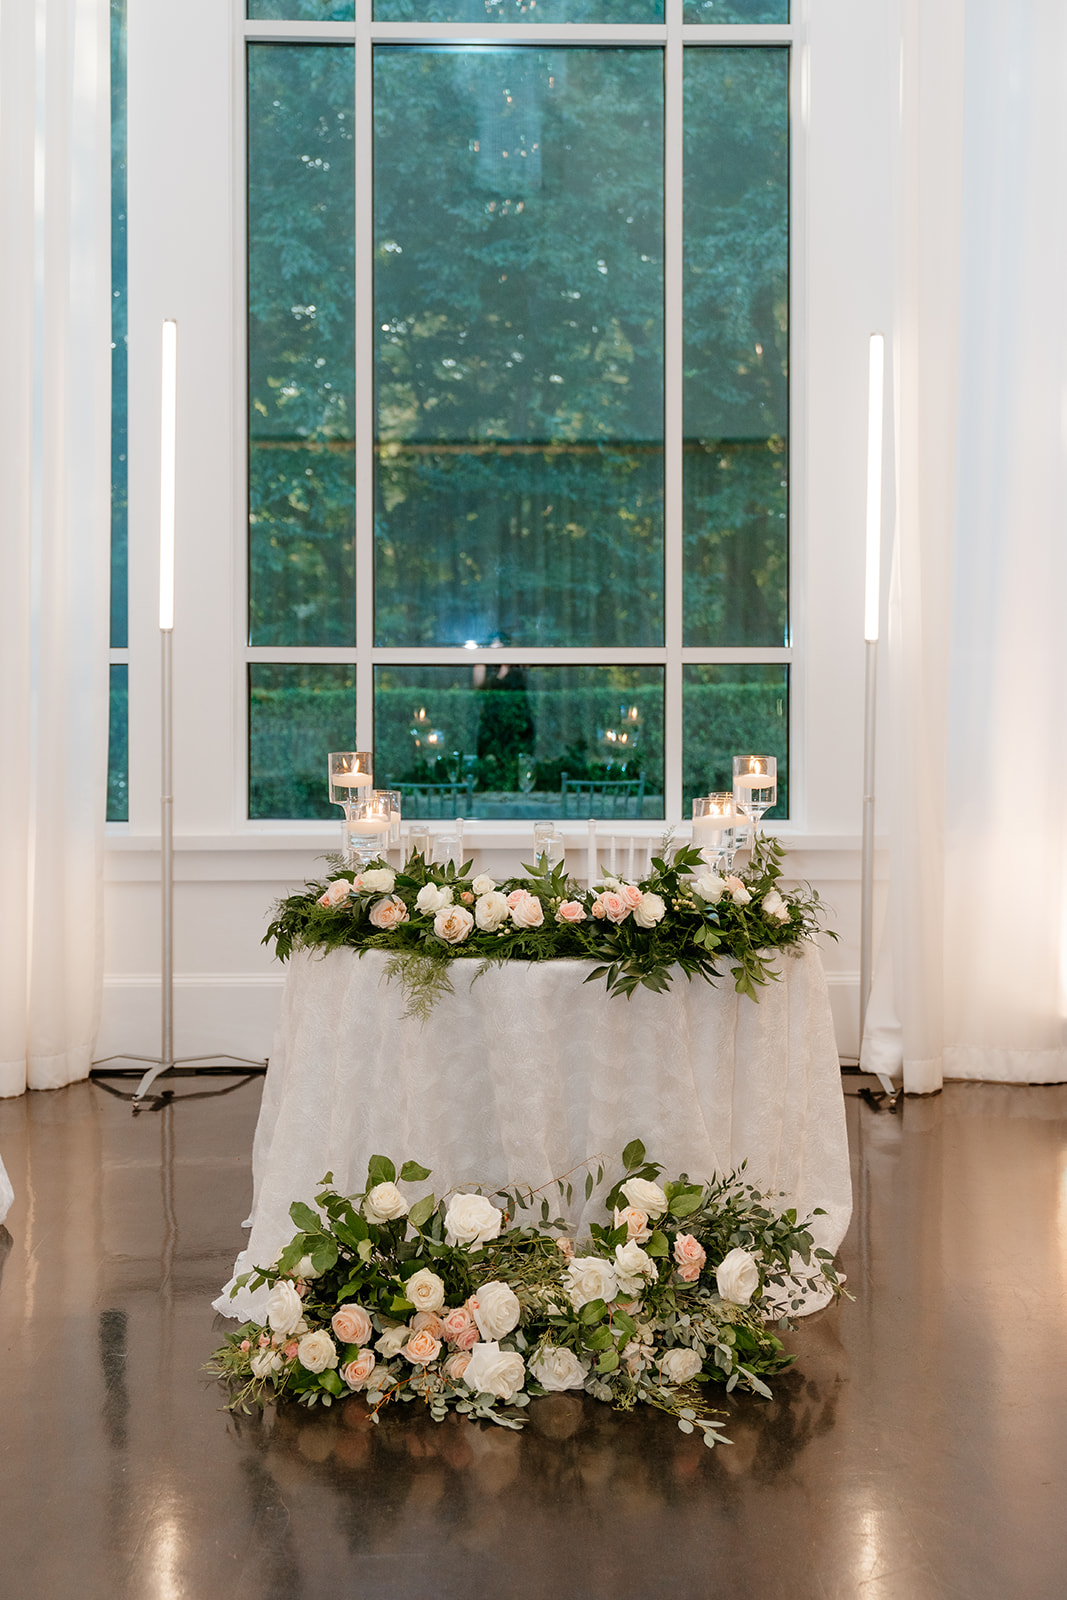 A decorated table with a floral arrangement and candles in front of a large window with white drapes.